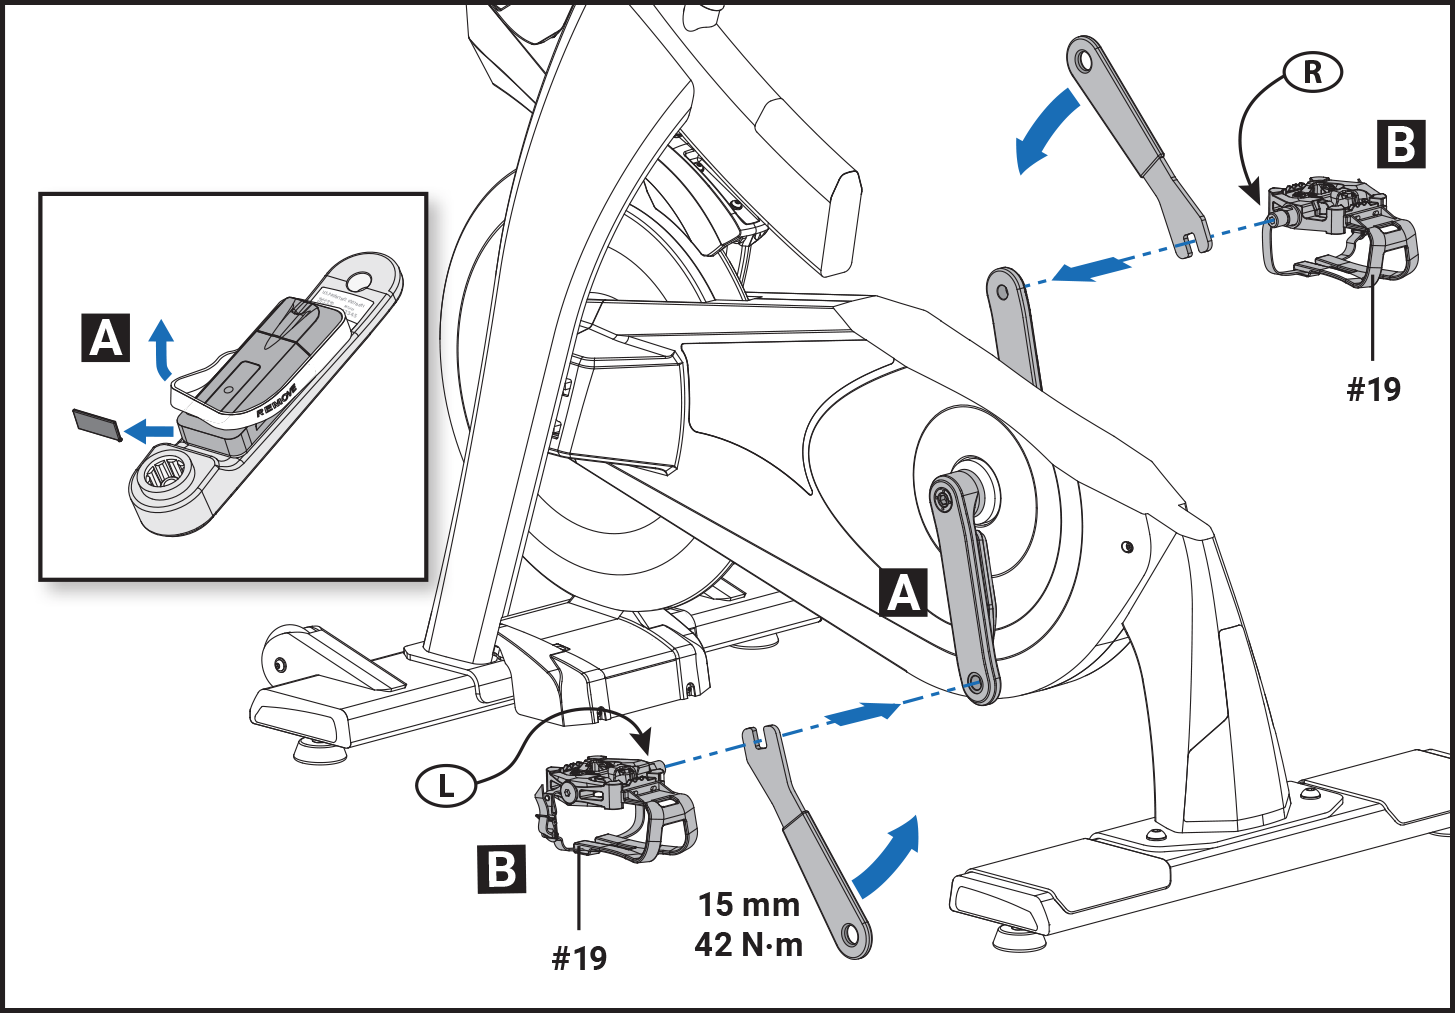 Remove the plastic band from the power meter (A) and install the pedals (B)